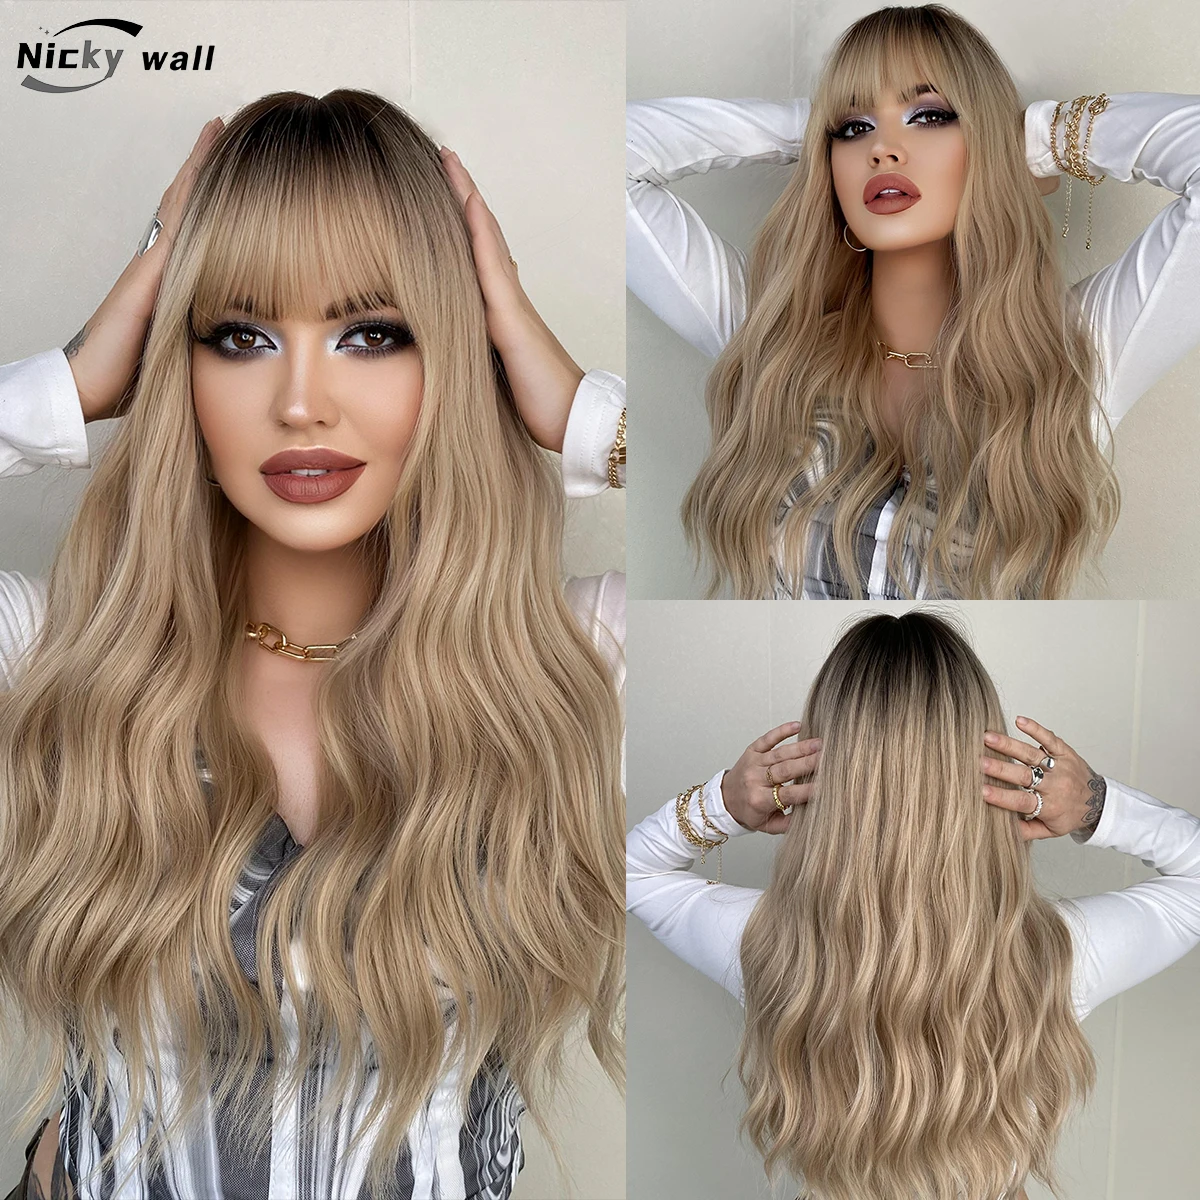 Blonde Long Wavy Wigs with Bangs Women Curly Wig Top Mixed Black Daily Use Synthetic Heat Resistant Female Fake Hair